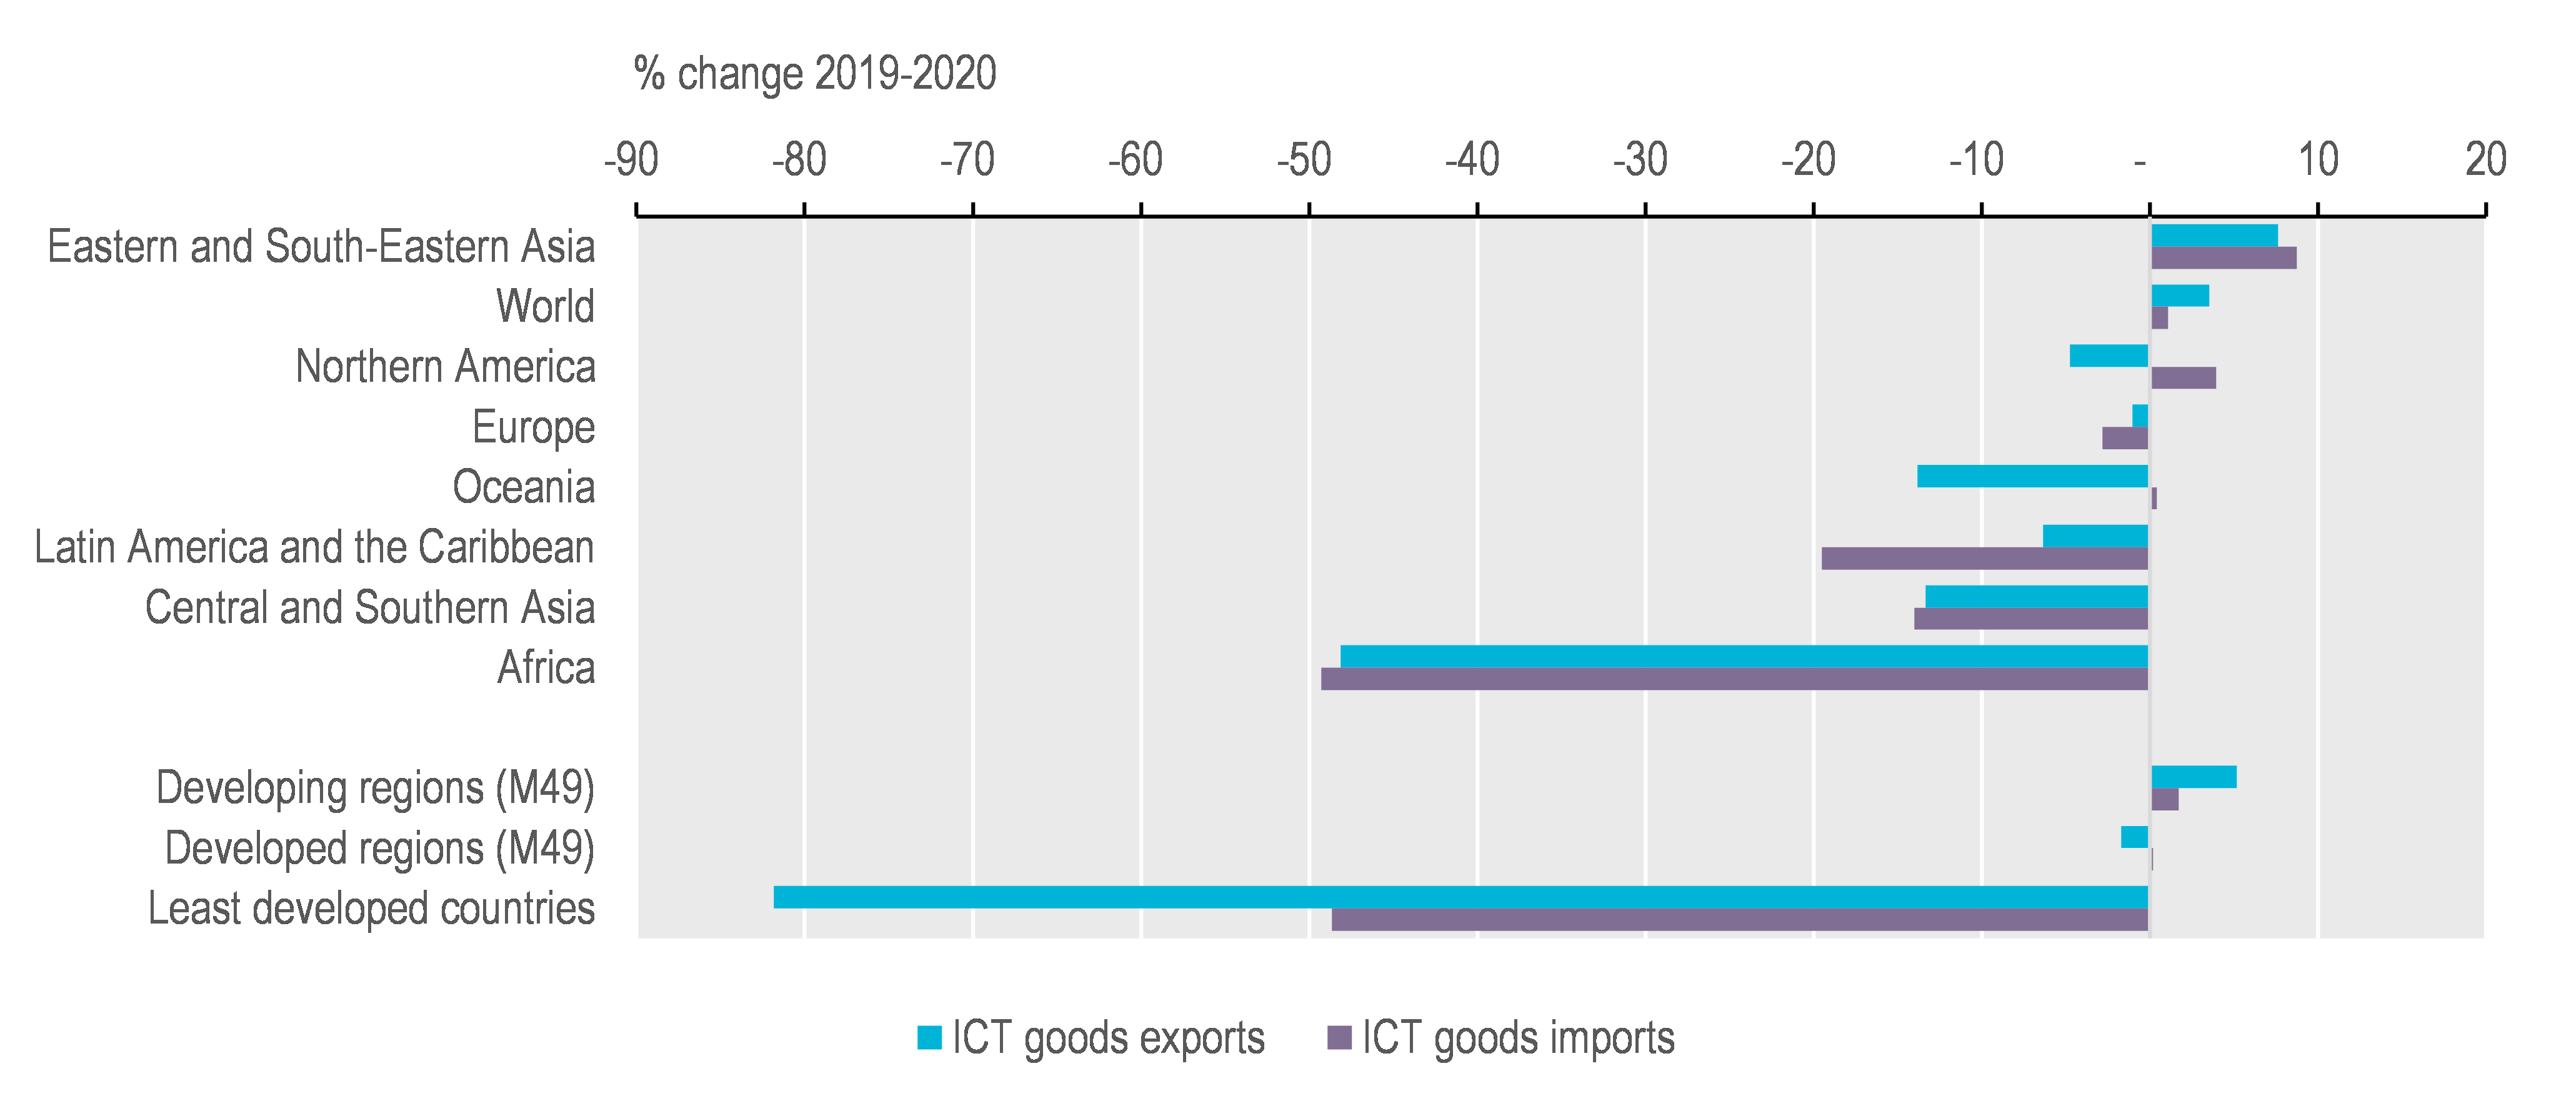 Change in ICT goods exports and imports, 2019-2020